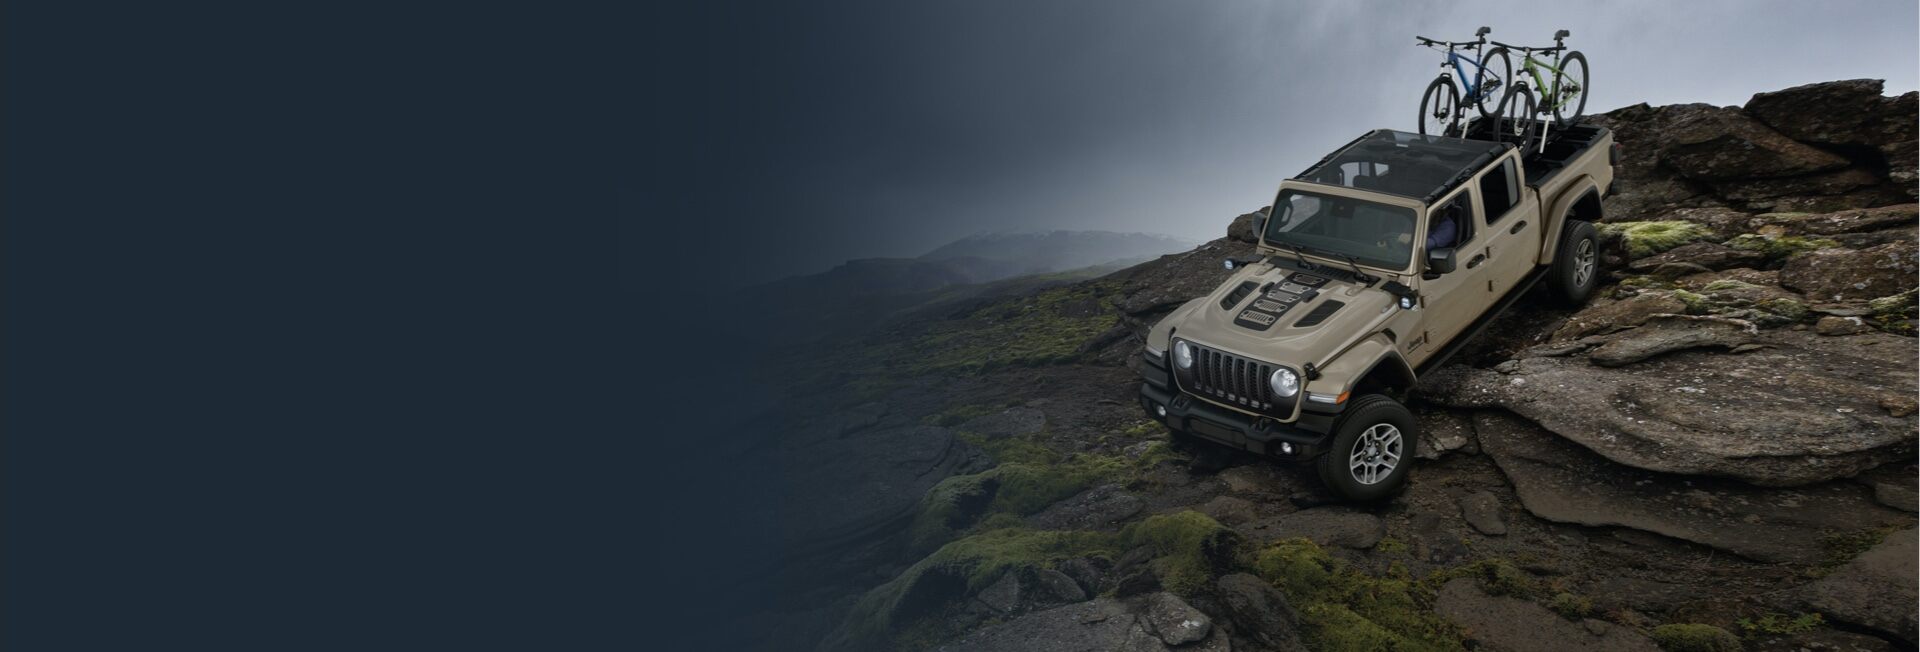 The 2022 Jeep Gladiator descending a rocky slope with two bicycles mounted on a carrier in the truck bed.